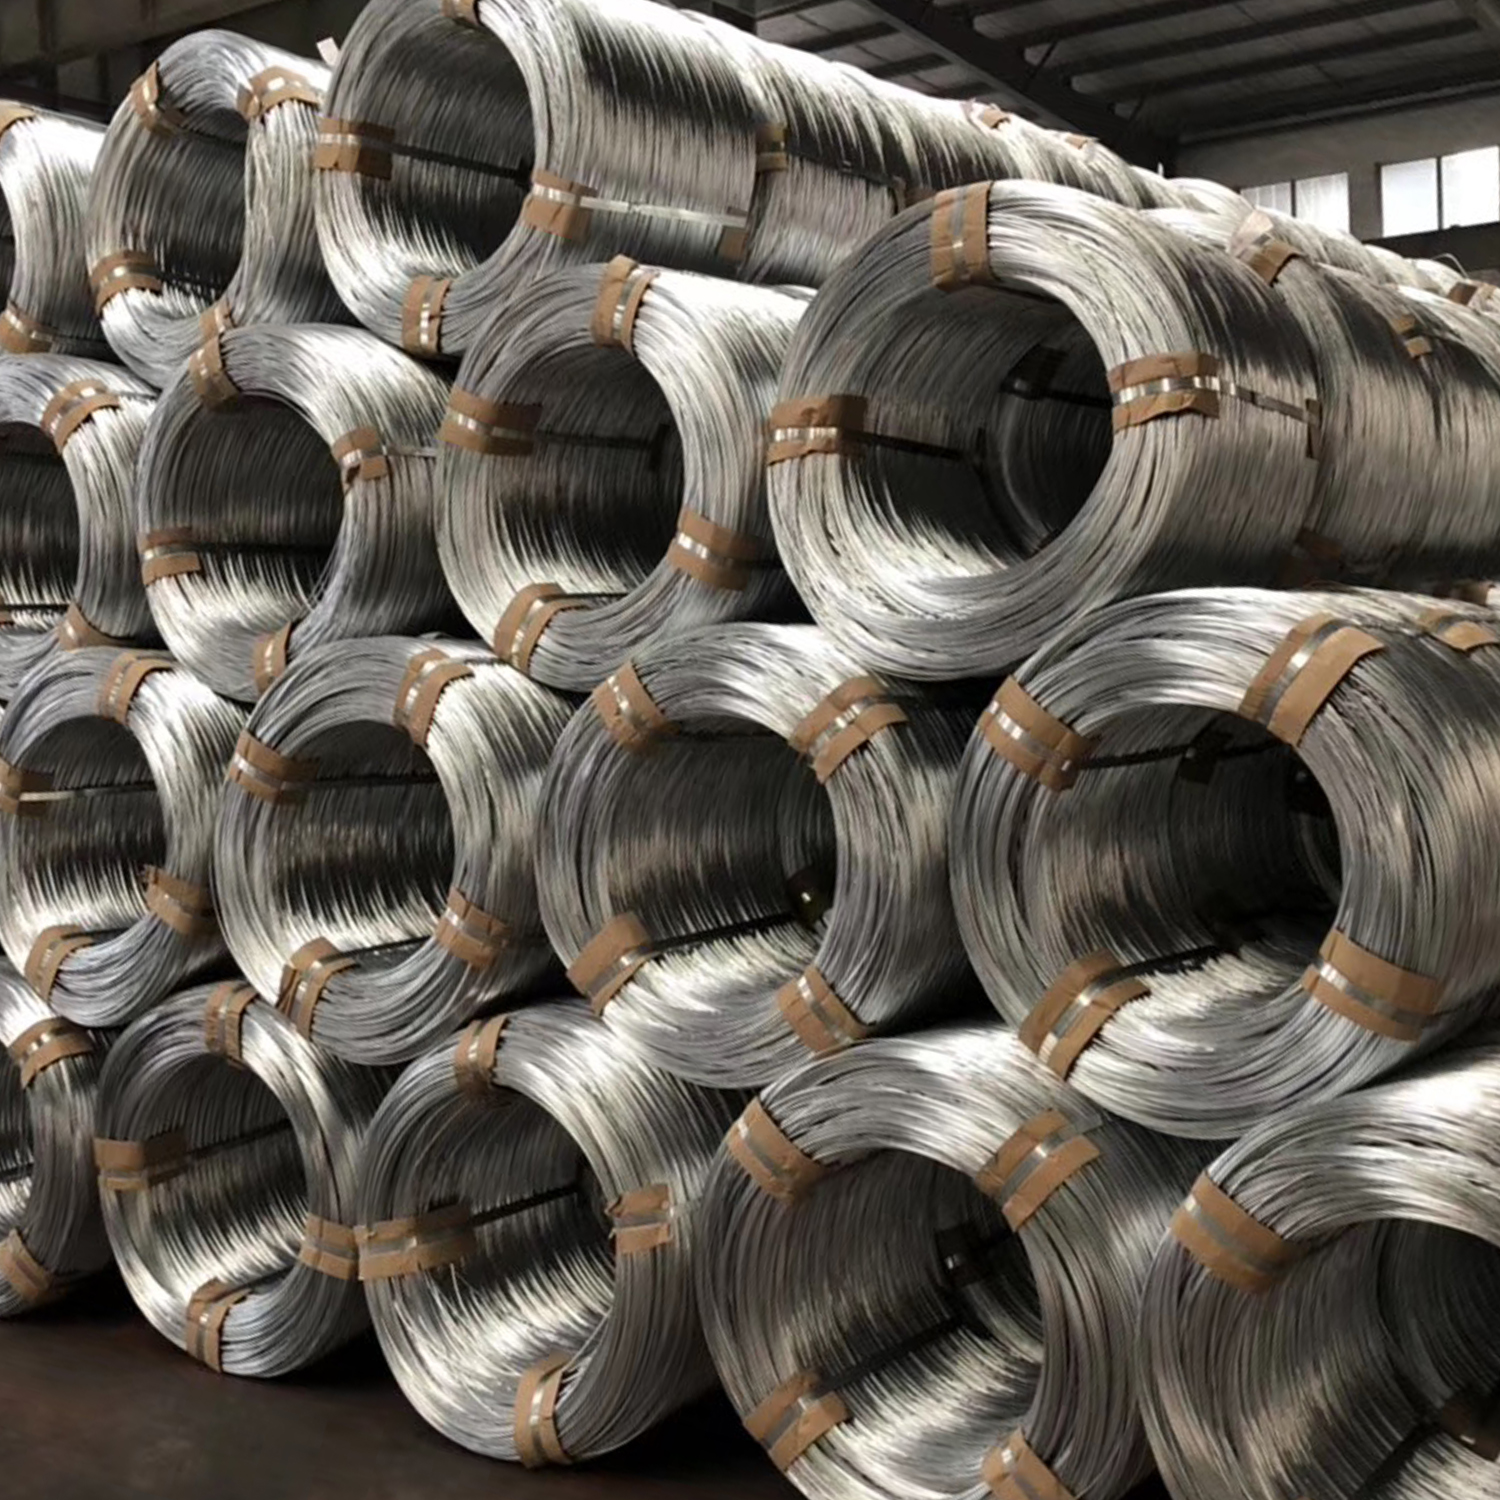 Hot dip galvanized wire has so many uses!